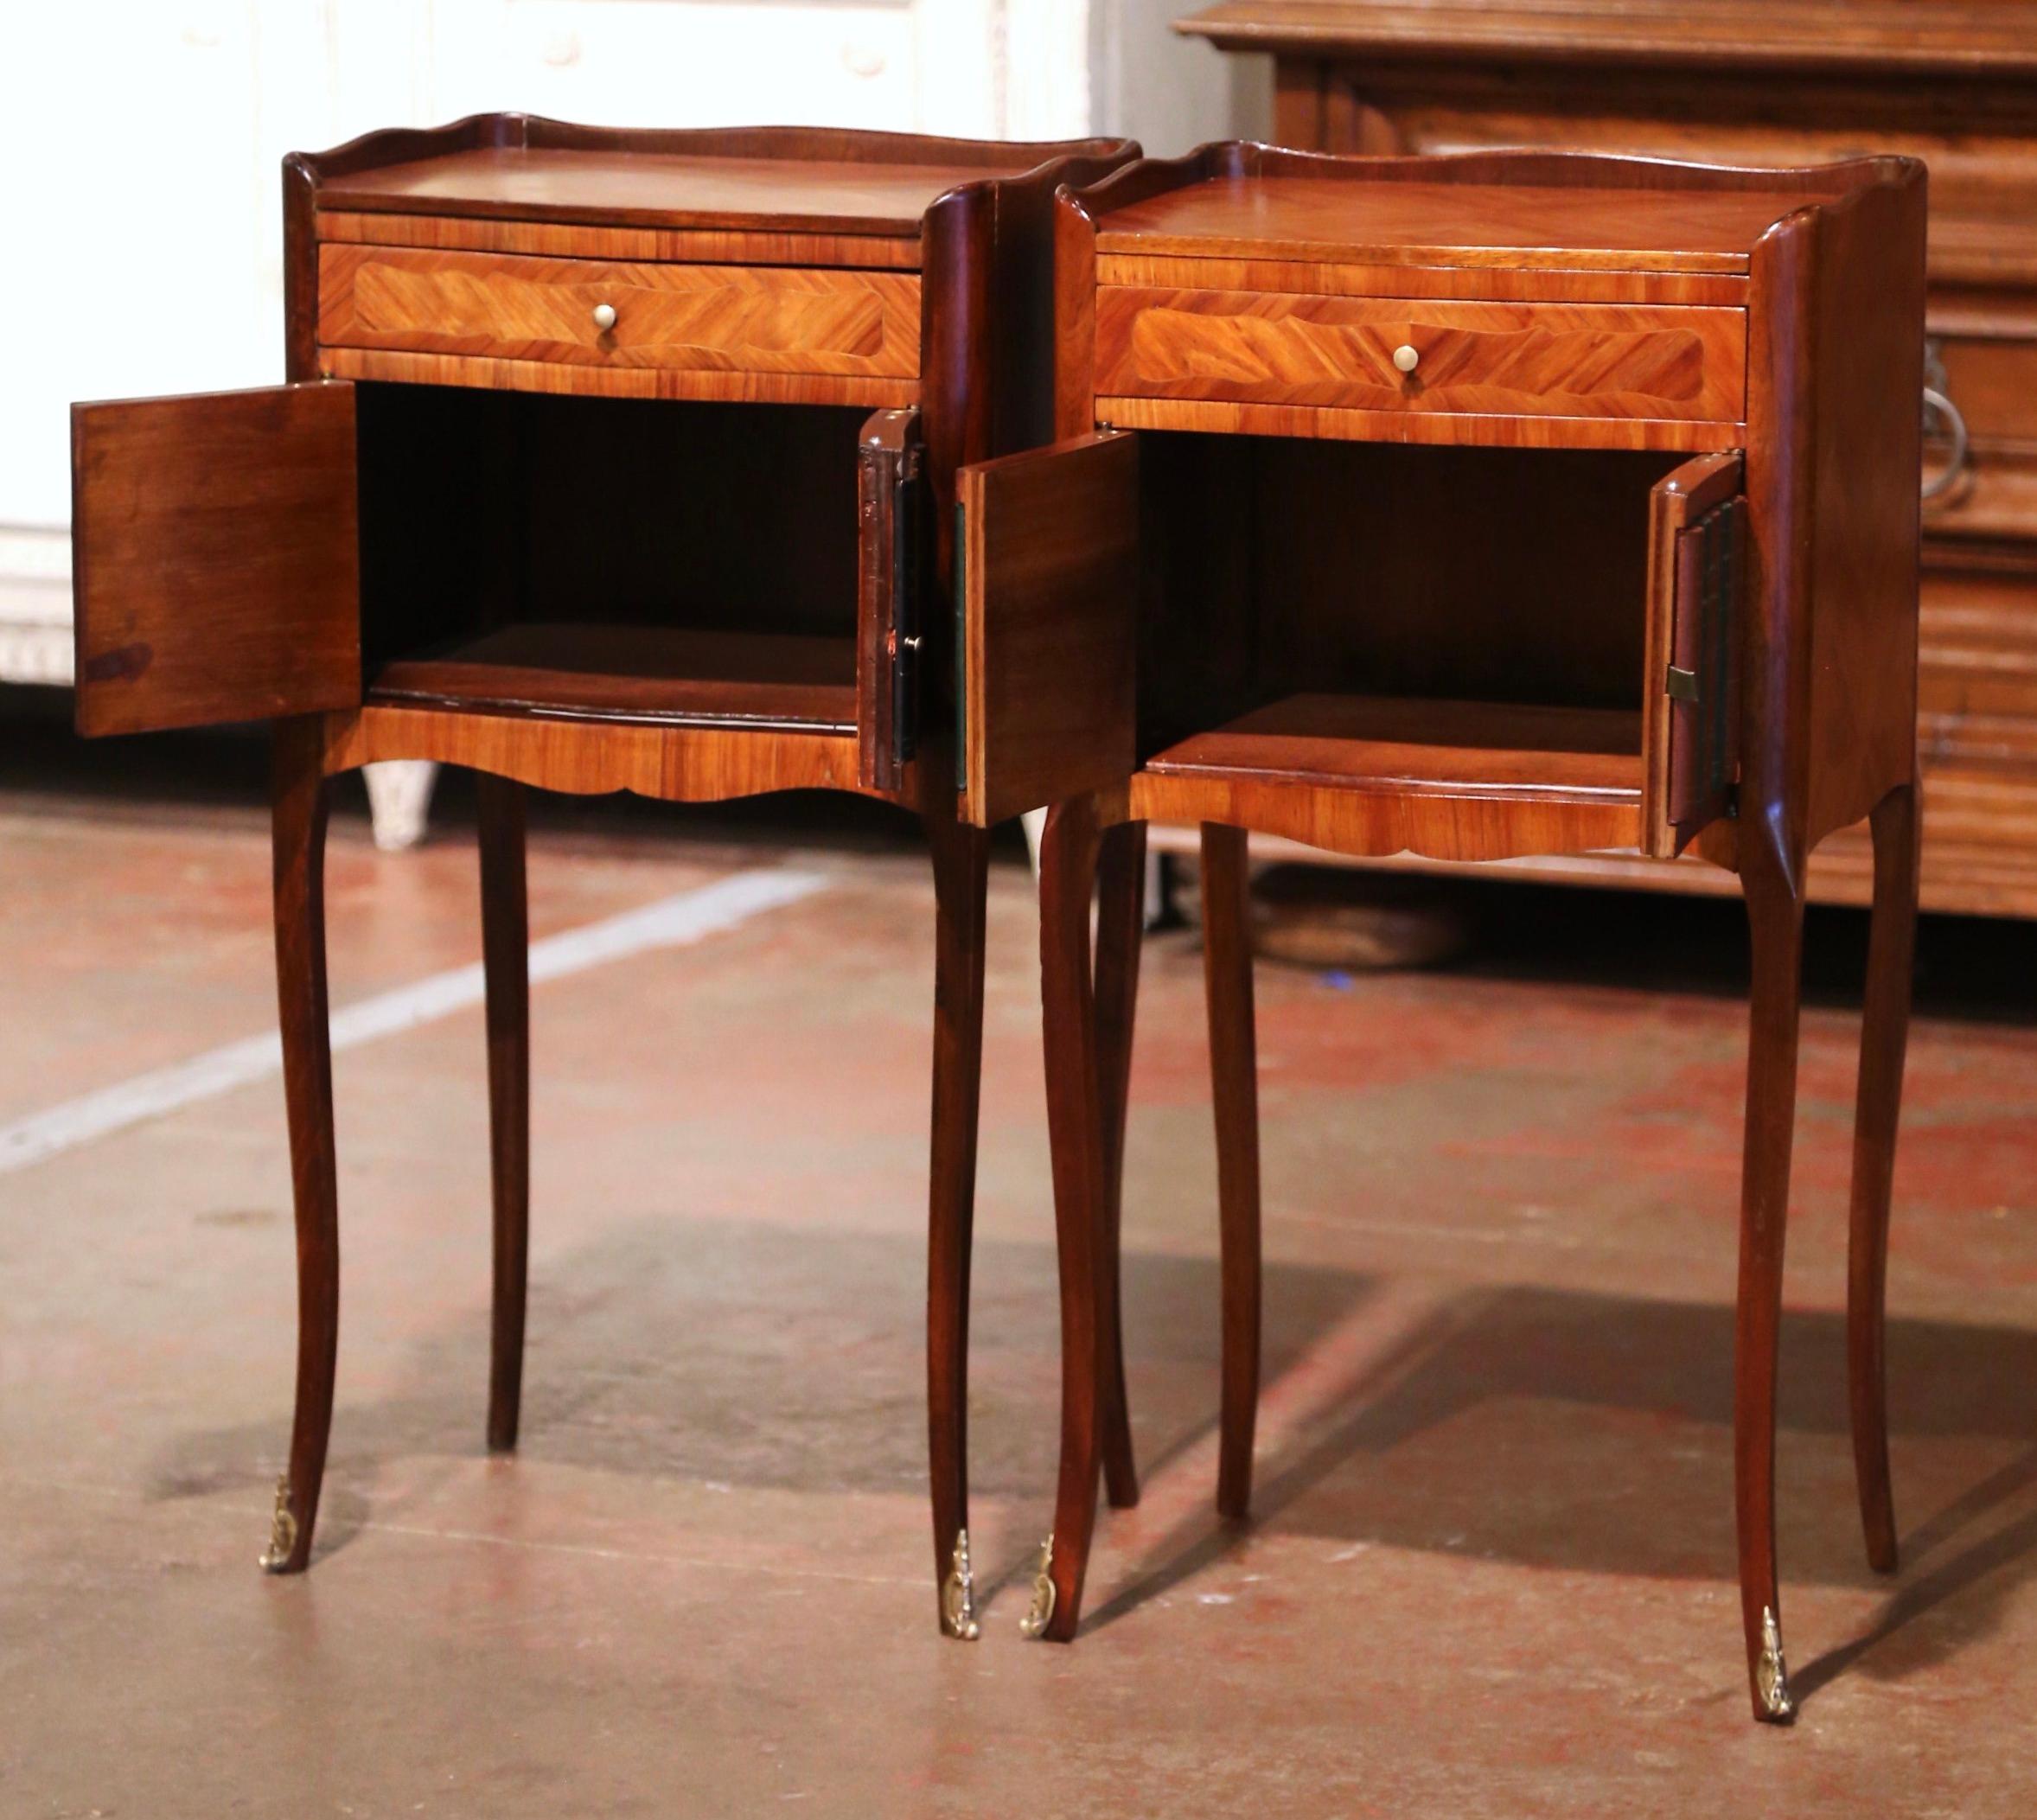 Pair of 19th Century French Walnut Nightstands with Leather Book Spine Doors For Sale 3